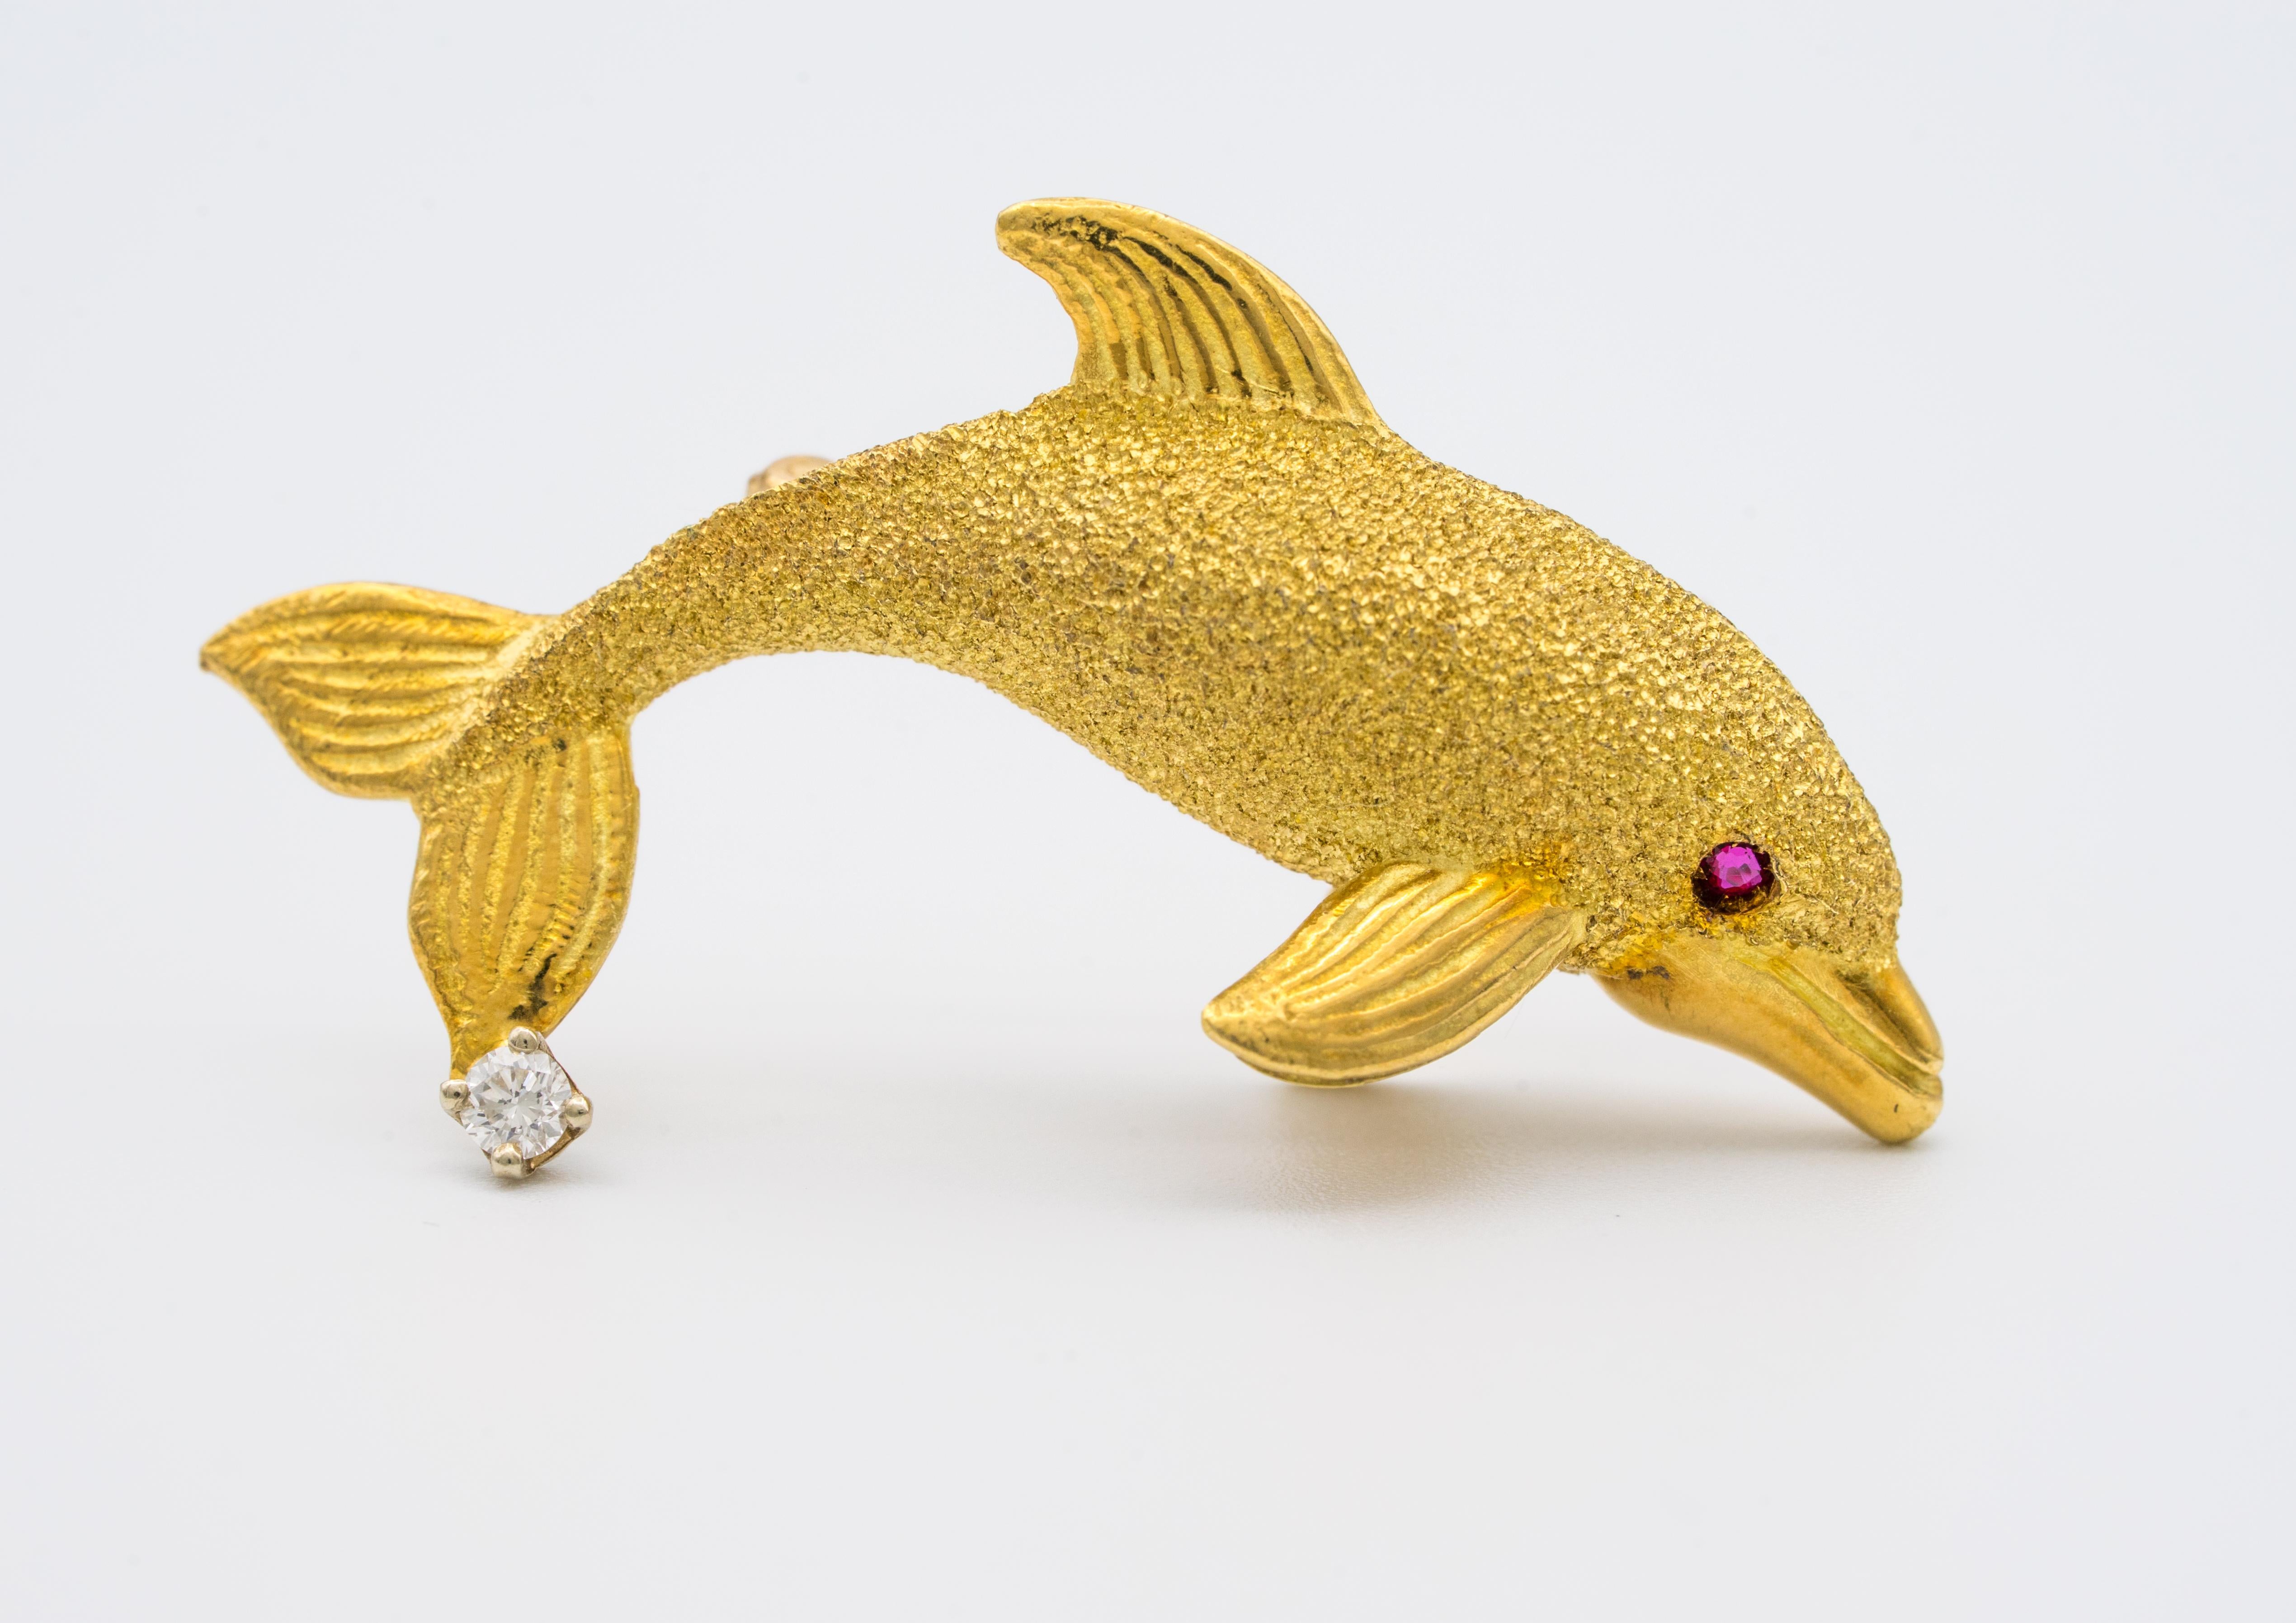 A vintage Dolphin pin in 18K yellow gold with a ruby eye and bezel set diamond.
Round brilliant diamond measures approximately 2.5mm and is G VS Color and clarity 

Dolphin measures: 1 3/8 x 5/8 inches.
Weighs 7.6 grams
We ship FedEx overnight to